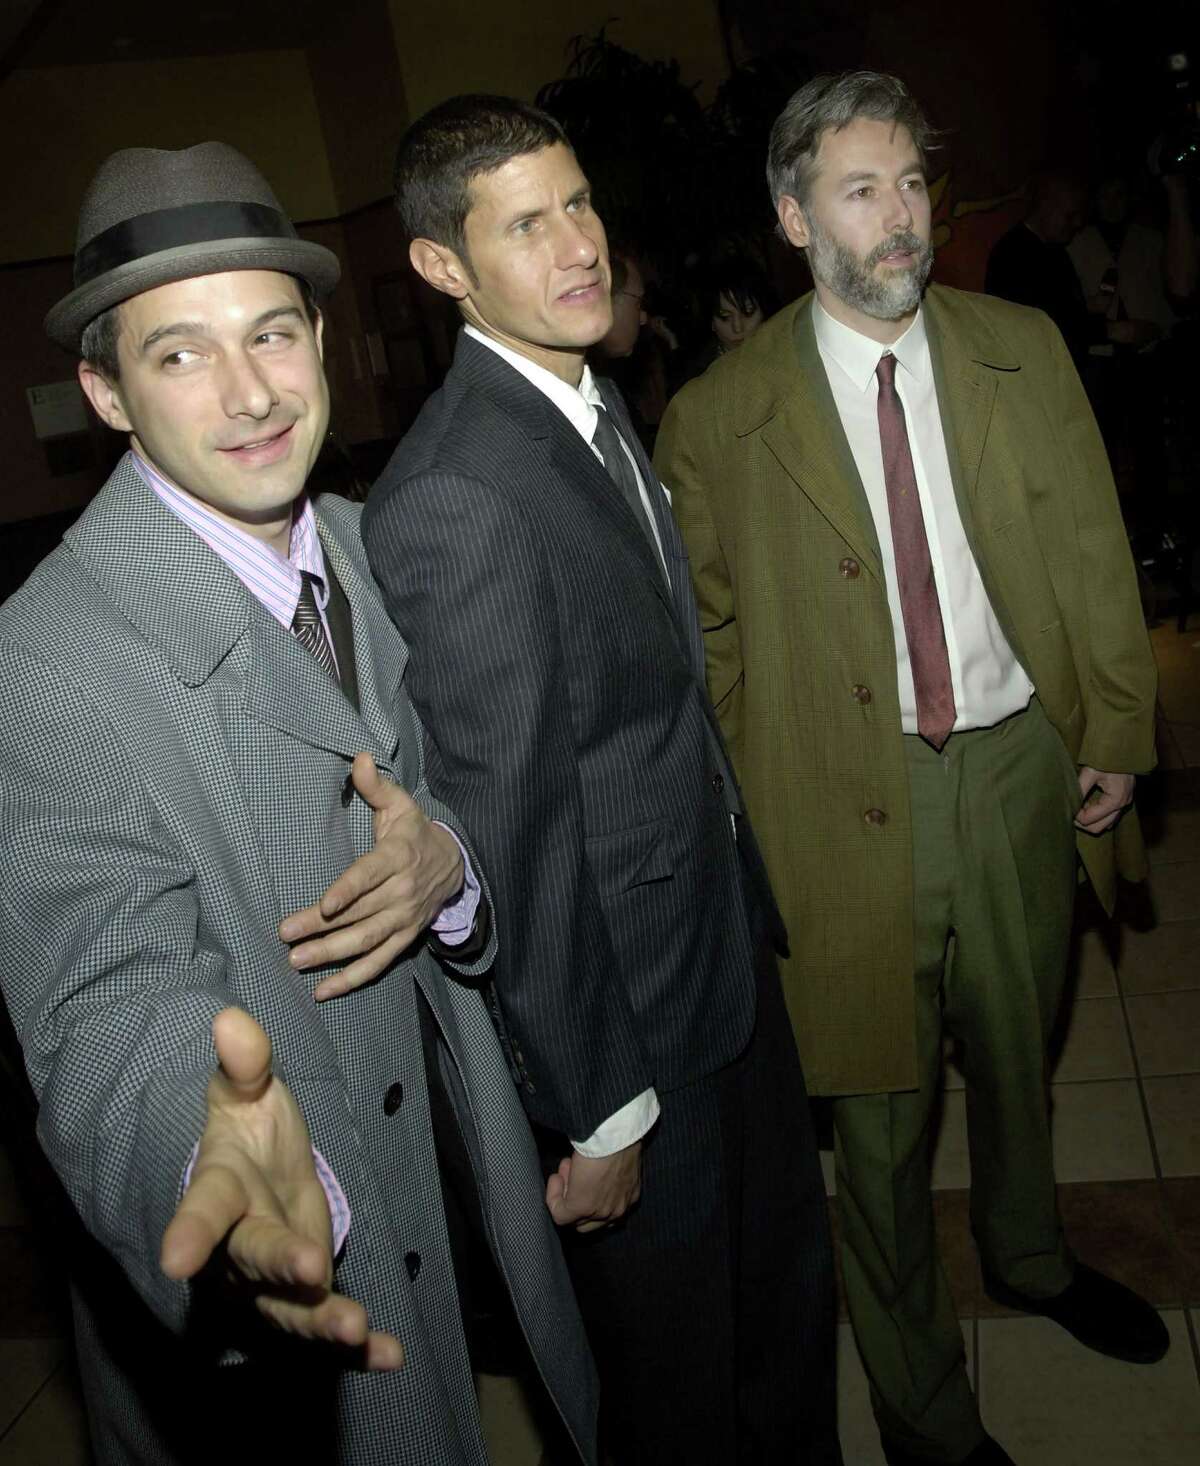 Left to right, Beastie Boys Adrock (Adam Horovitz), Mike D (Michael Diamond), and MCA (Adam Yauch) arrive at the premiere of their new film "Awesome; I ... Shot That!" Tuesday, March 28, 2006 in New York. The film, which documents a 2004 Beastie Boys concert at New York's Madison Square Garden, is comprised of footage shot by 50 fans who were given cameras to record the show. The film will be released in selected cities Friday, March 31, 2006.